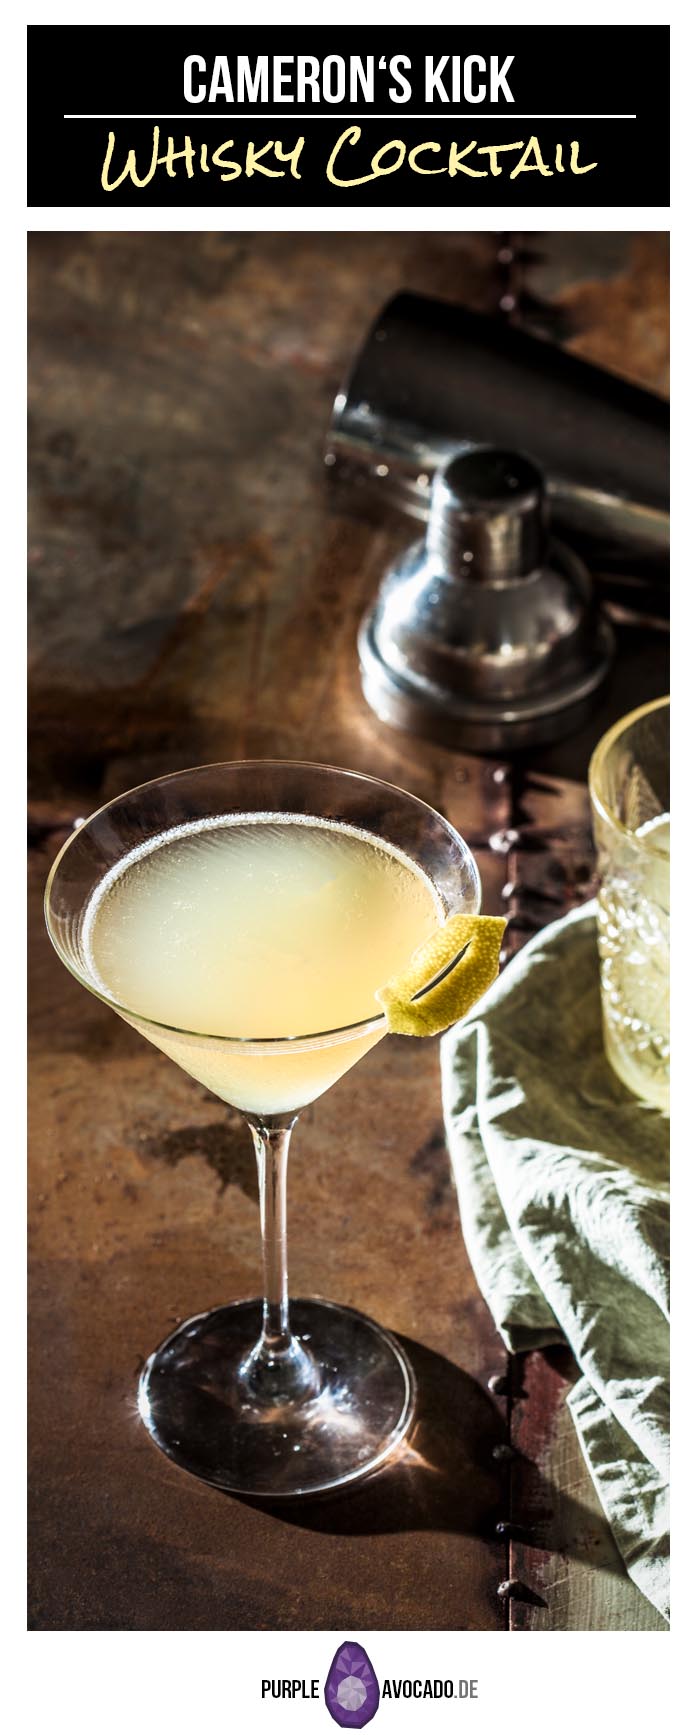 Camerons Kick - A classic whisky cocktail for whisky sceptics. #cocktail #whisky #whiskey #beverages #drinks #recipes #foodstyling #alcoholic